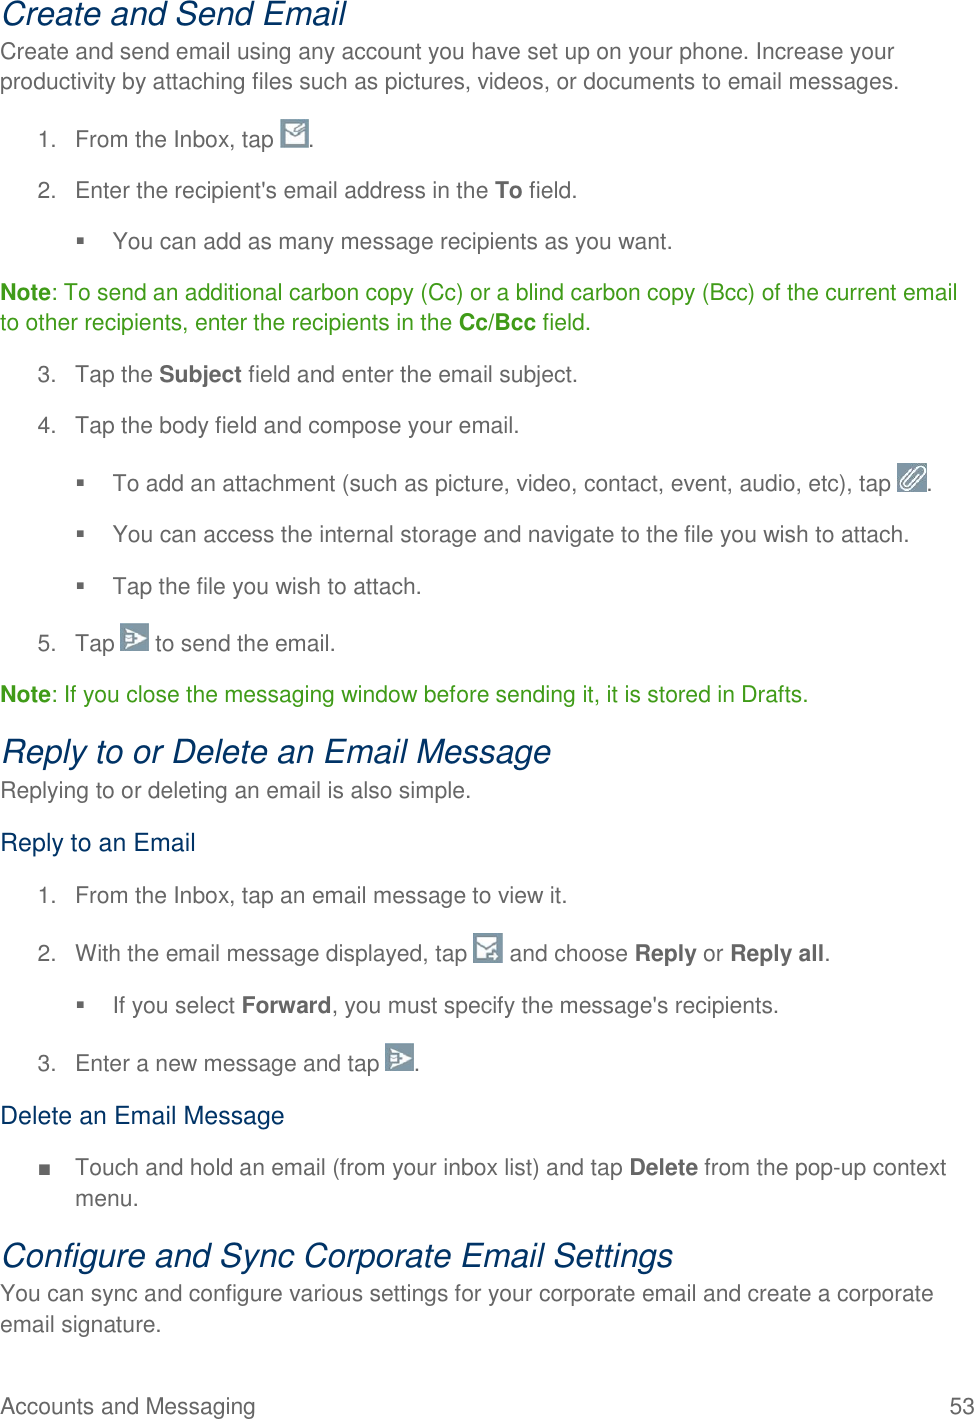 Accounts and Messaging  53 Create and Send Email Create and send email using any account you have set up on your phone. Increase your productivity by attaching files such as pictures, videos, or documents to email messages. 1.  From the Inbox, tap  . 2.  Enter the recipient&apos;s email address in the To field.   You can add as many message recipients as you want. Note: To send an additional carbon copy (Cc) or a blind carbon copy (Bcc) of the current email to other recipients, enter the recipients in the Cc/Bcc field. 3.  Tap the Subject field and enter the email subject. 4.  Tap the body field and compose your email.   To add an attachment (such as picture, video, contact, event, audio, etc), tap  .   You can access the internal storage and navigate to the file you wish to attach.   Tap the file you wish to attach. 5.  Tap   to send the email. Note: If you close the messaging window before sending it, it is stored in Drafts. Reply to or Delete an Email Message Replying to or deleting an email is also simple. Reply to an Email 1.  From the Inbox, tap an email message to view it. 2.  With the email message displayed, tap   and choose Reply or Reply all.   If you select Forward, you must specify the message&apos;s recipients. 3.  Enter a new message and tap  . Delete an Email Message ■  Touch and hold an email (from your inbox list) and tap Delete from the pop-up context menu. Configure and Sync Corporate Email Settings You can sync and configure various settings for your corporate email and create a corporate email signature. 